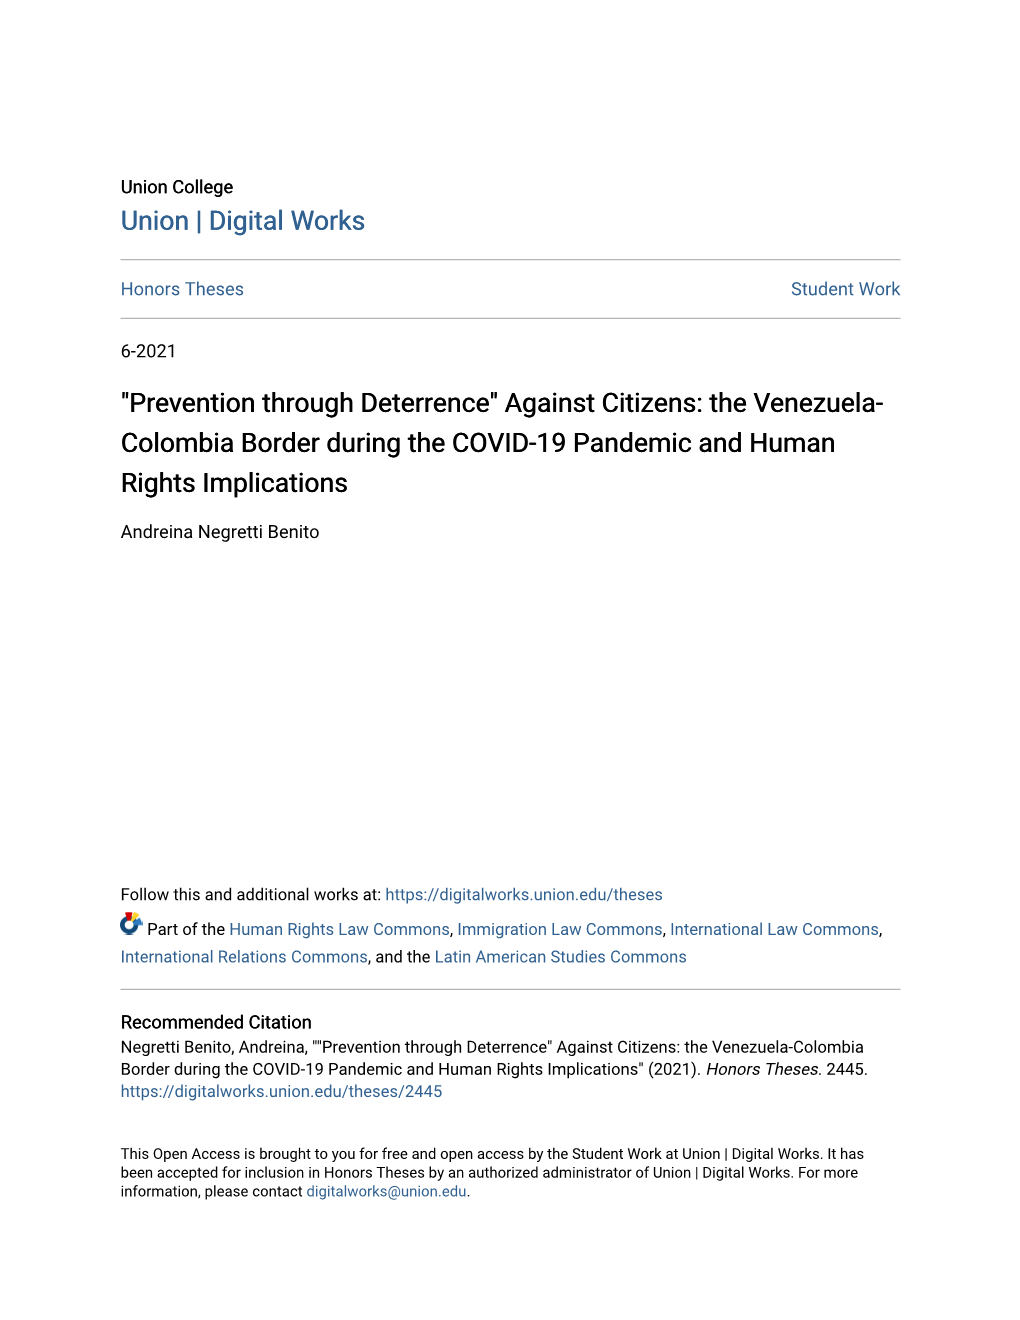 "Prevention Through Deterrence" Against Citizens: the Venezuela- Colombia Border During the COVID-19 Pandemic and Human Rights Implications